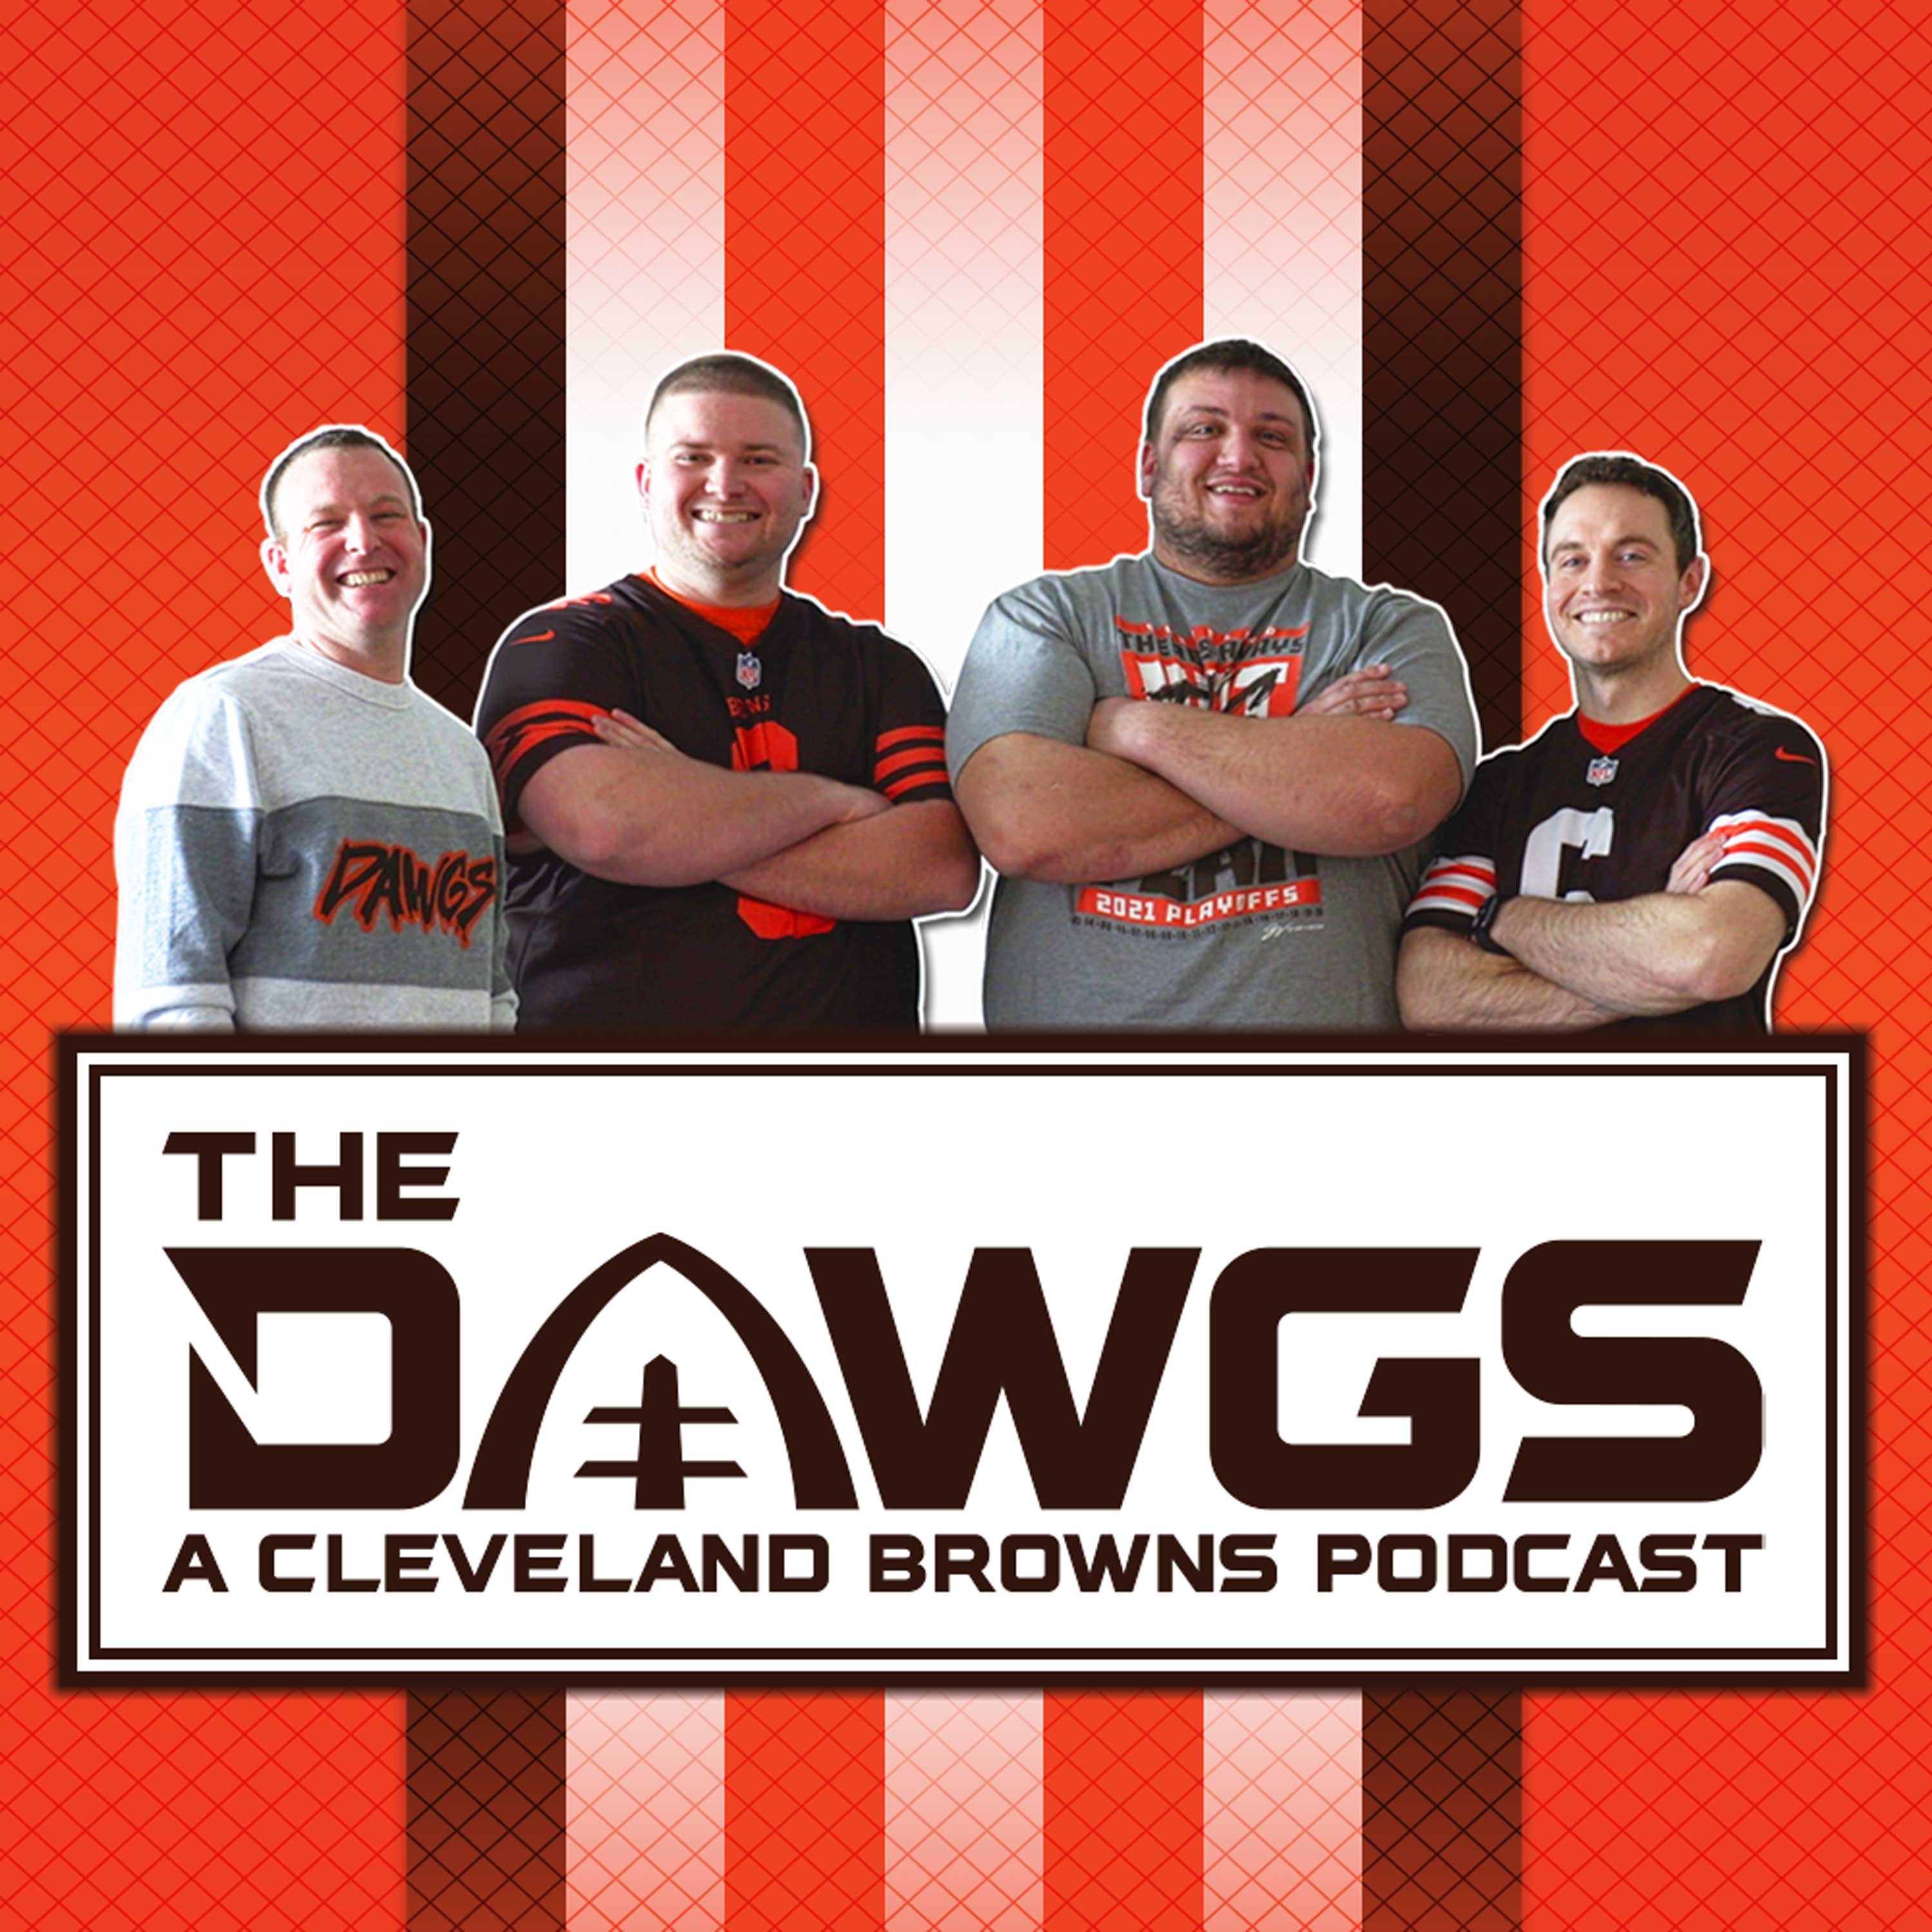 Schedule Predictions Part 1 + Jaguars Preseason Game Reactions | The Dawgs - A Cleveland Browns Podcast - August 15, 2021